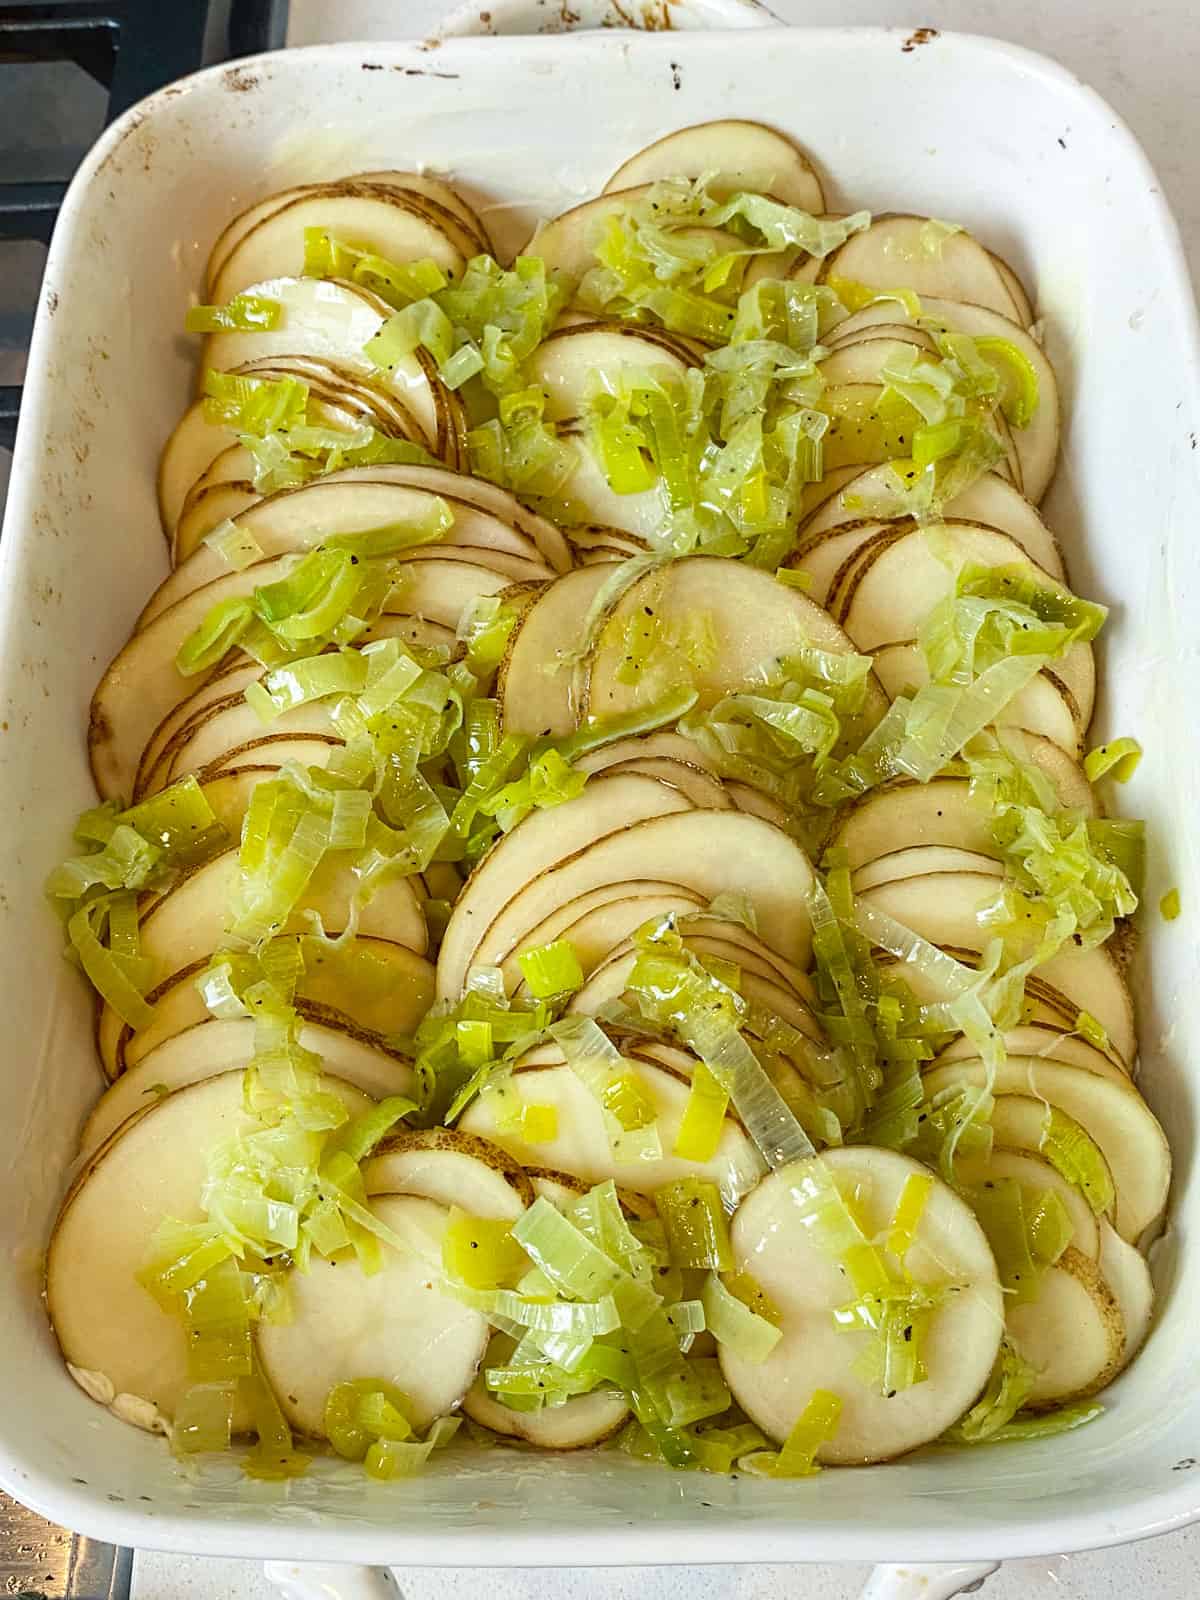 Add the rest of the sautéed leeks on top of the thinly sliced potatoes.